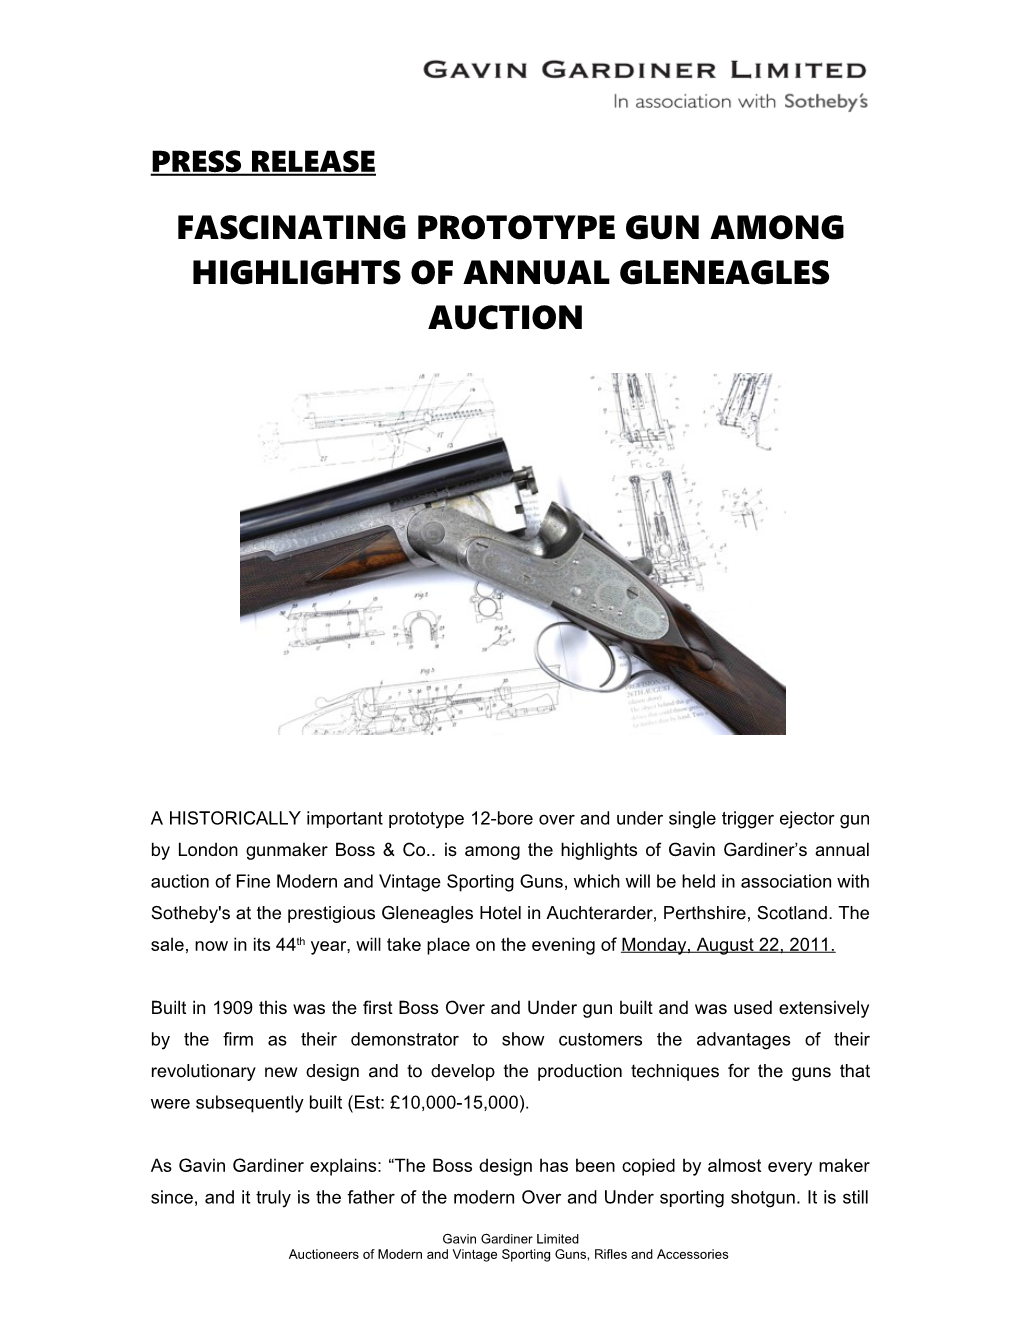 Fascinating Prototype Gun Among Highlights of Annual Gleneagles Auction